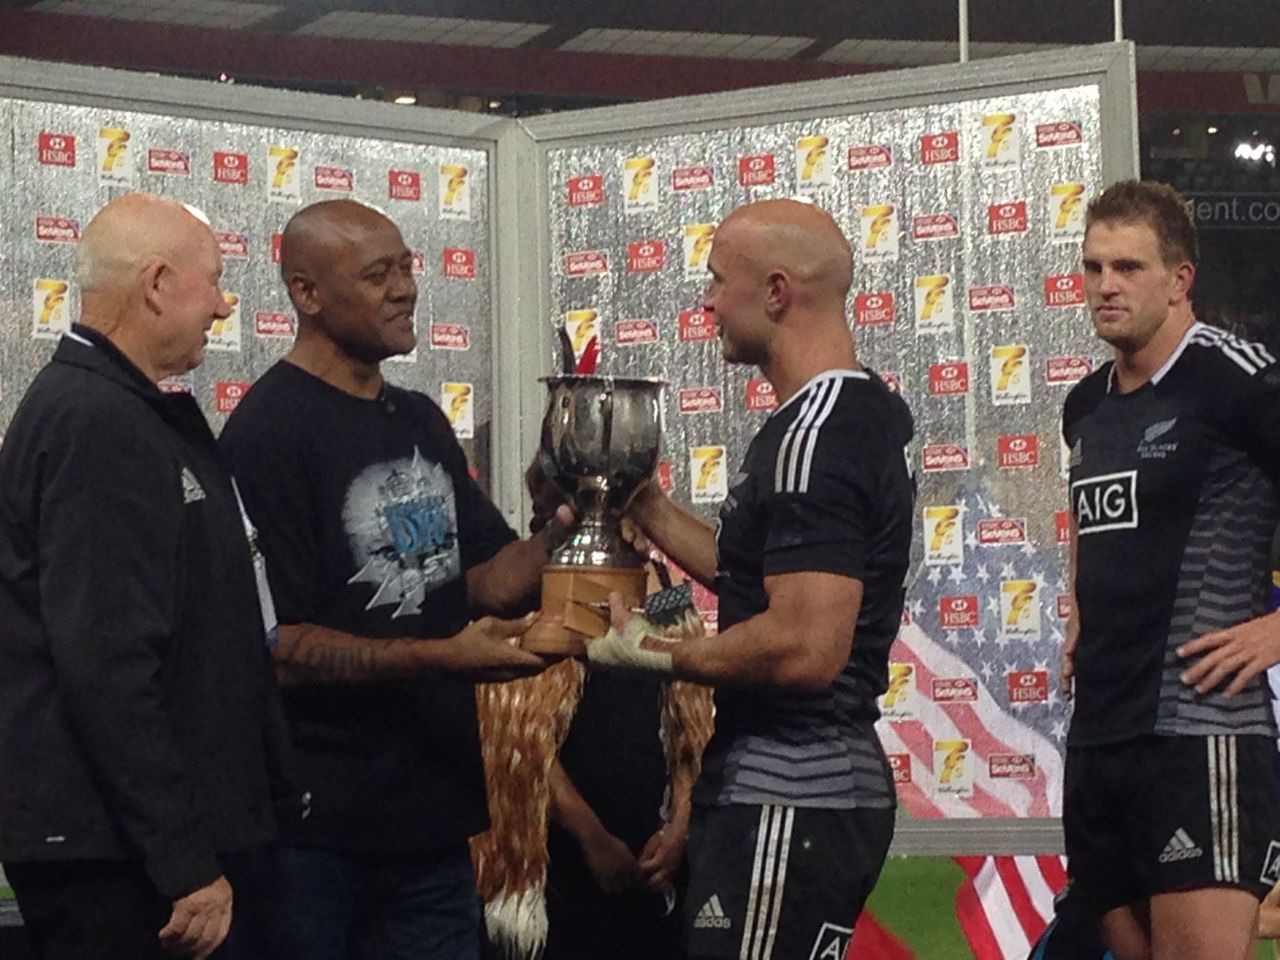 Forbes was presented the trophy by New Zealand rugby legend Jonah Lomu, who was an ambassador for the HSBC Sevens World Series event.